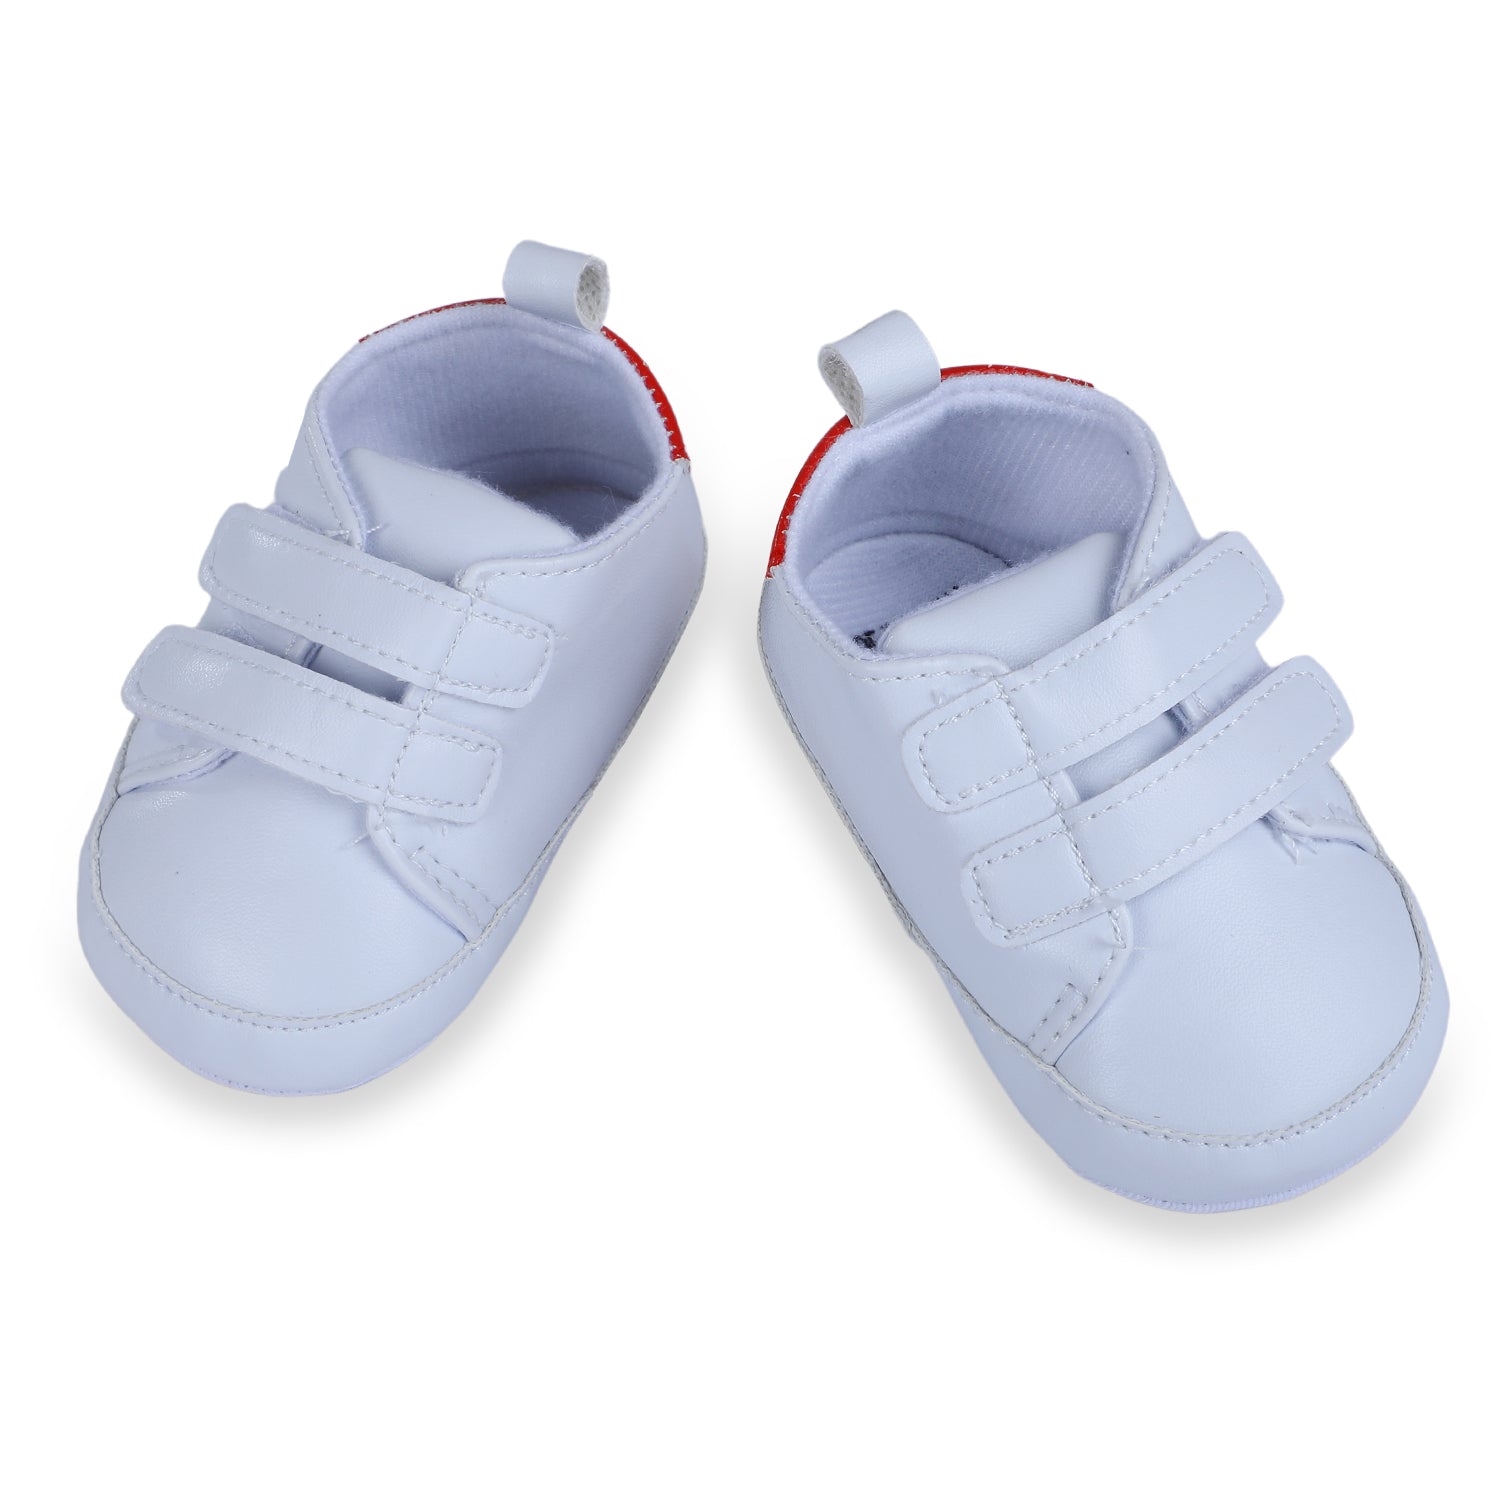 Baby Moo Little Champ Soft Sole Anti-Slip Booties - White